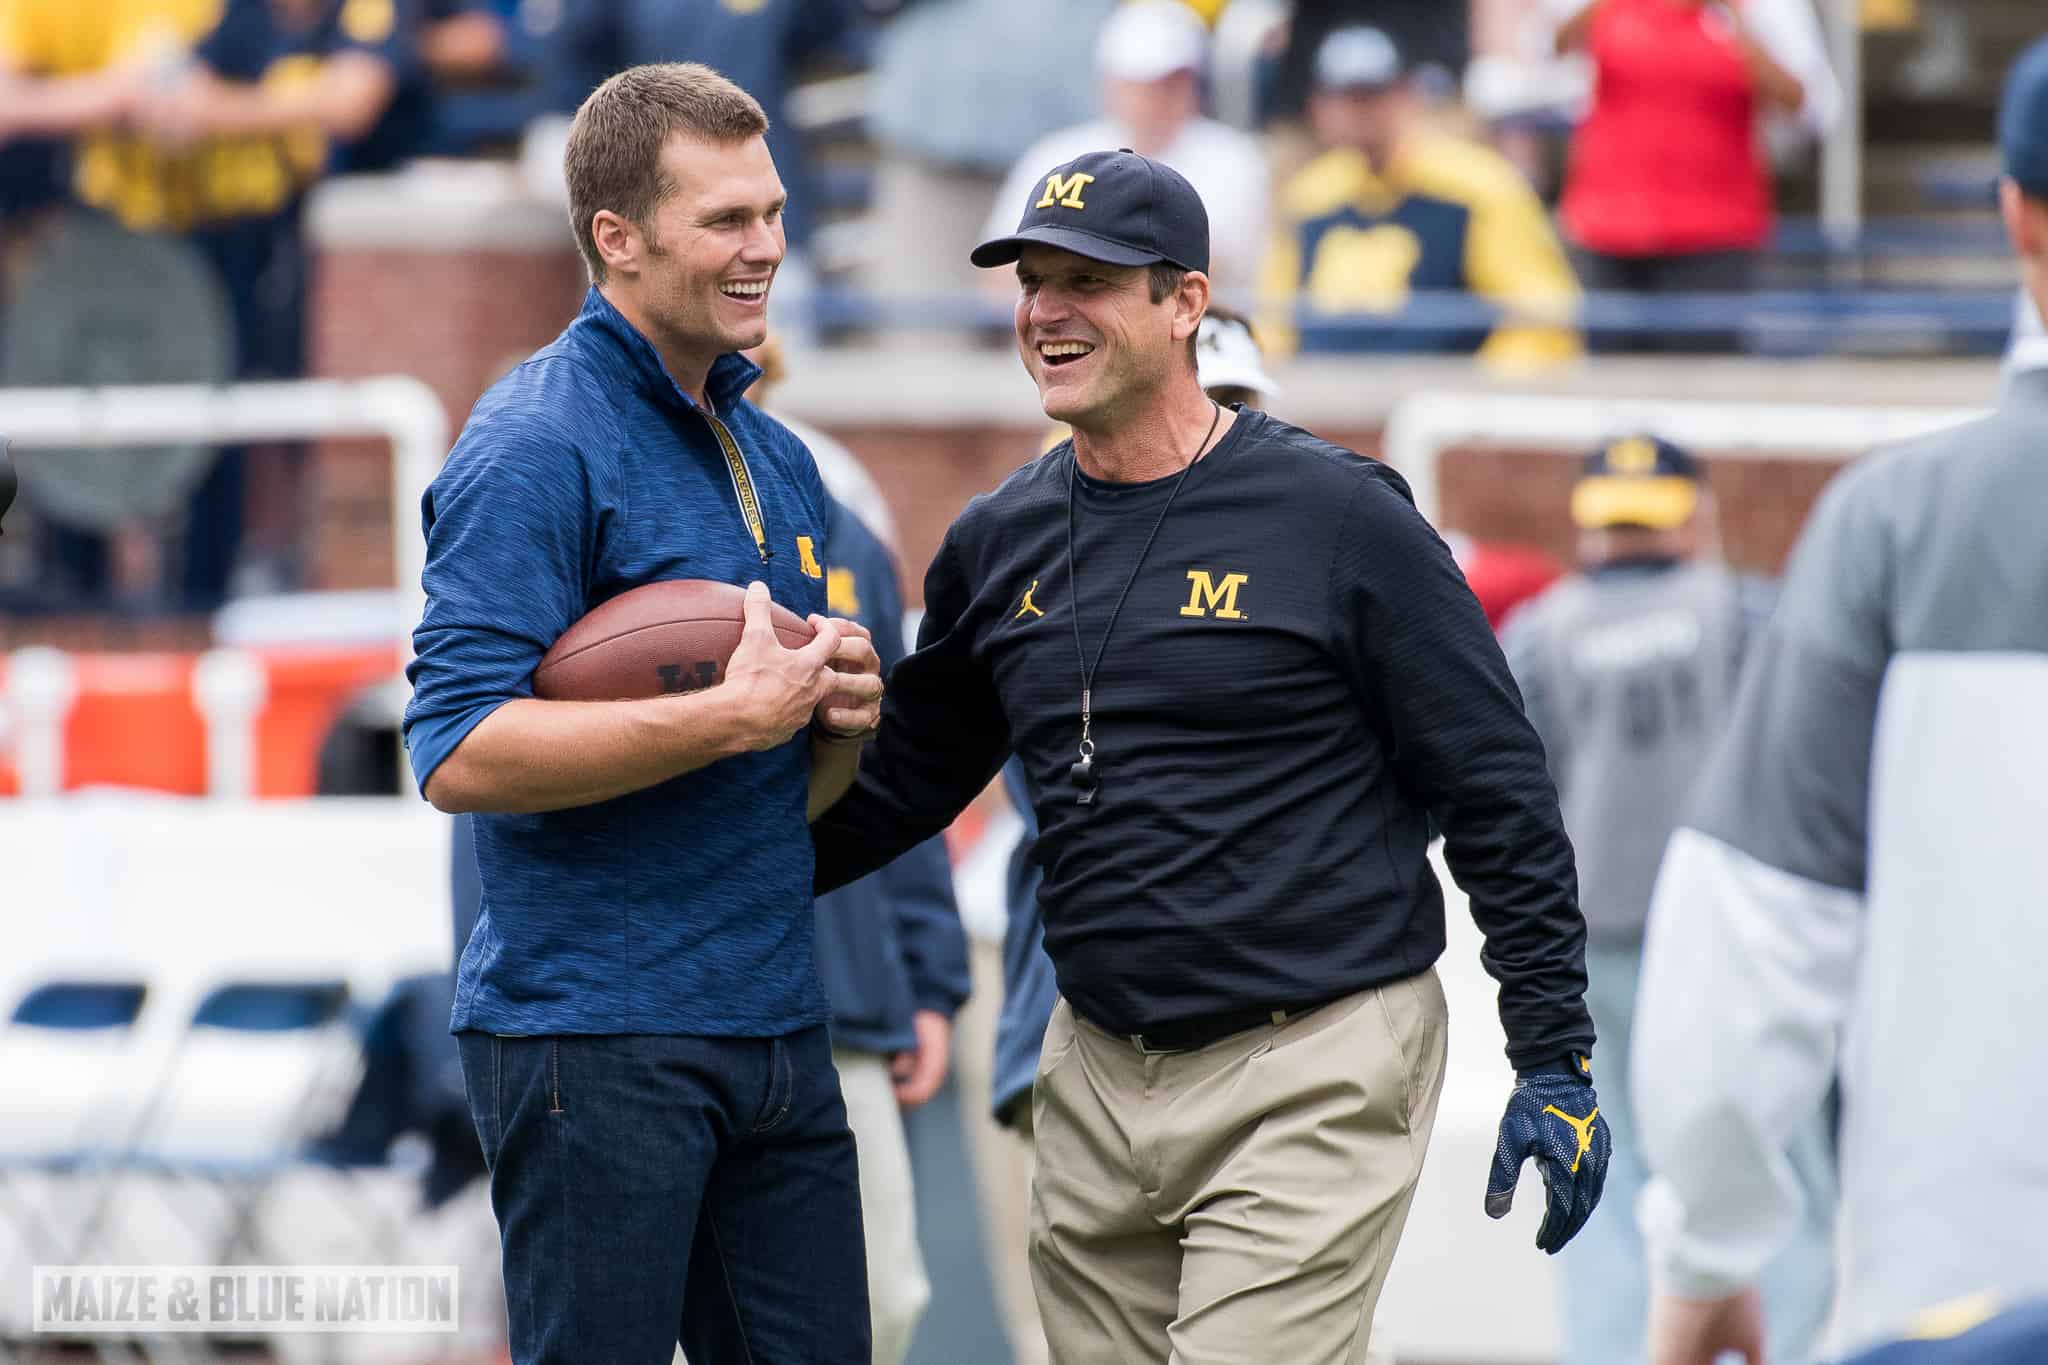 Tom Brady plays catch with Head Coach Jim Harbaugh before Michigan's 45-28 victory over Colorado on September 17, 2016. (James Coller/Maize and Blue Nation)